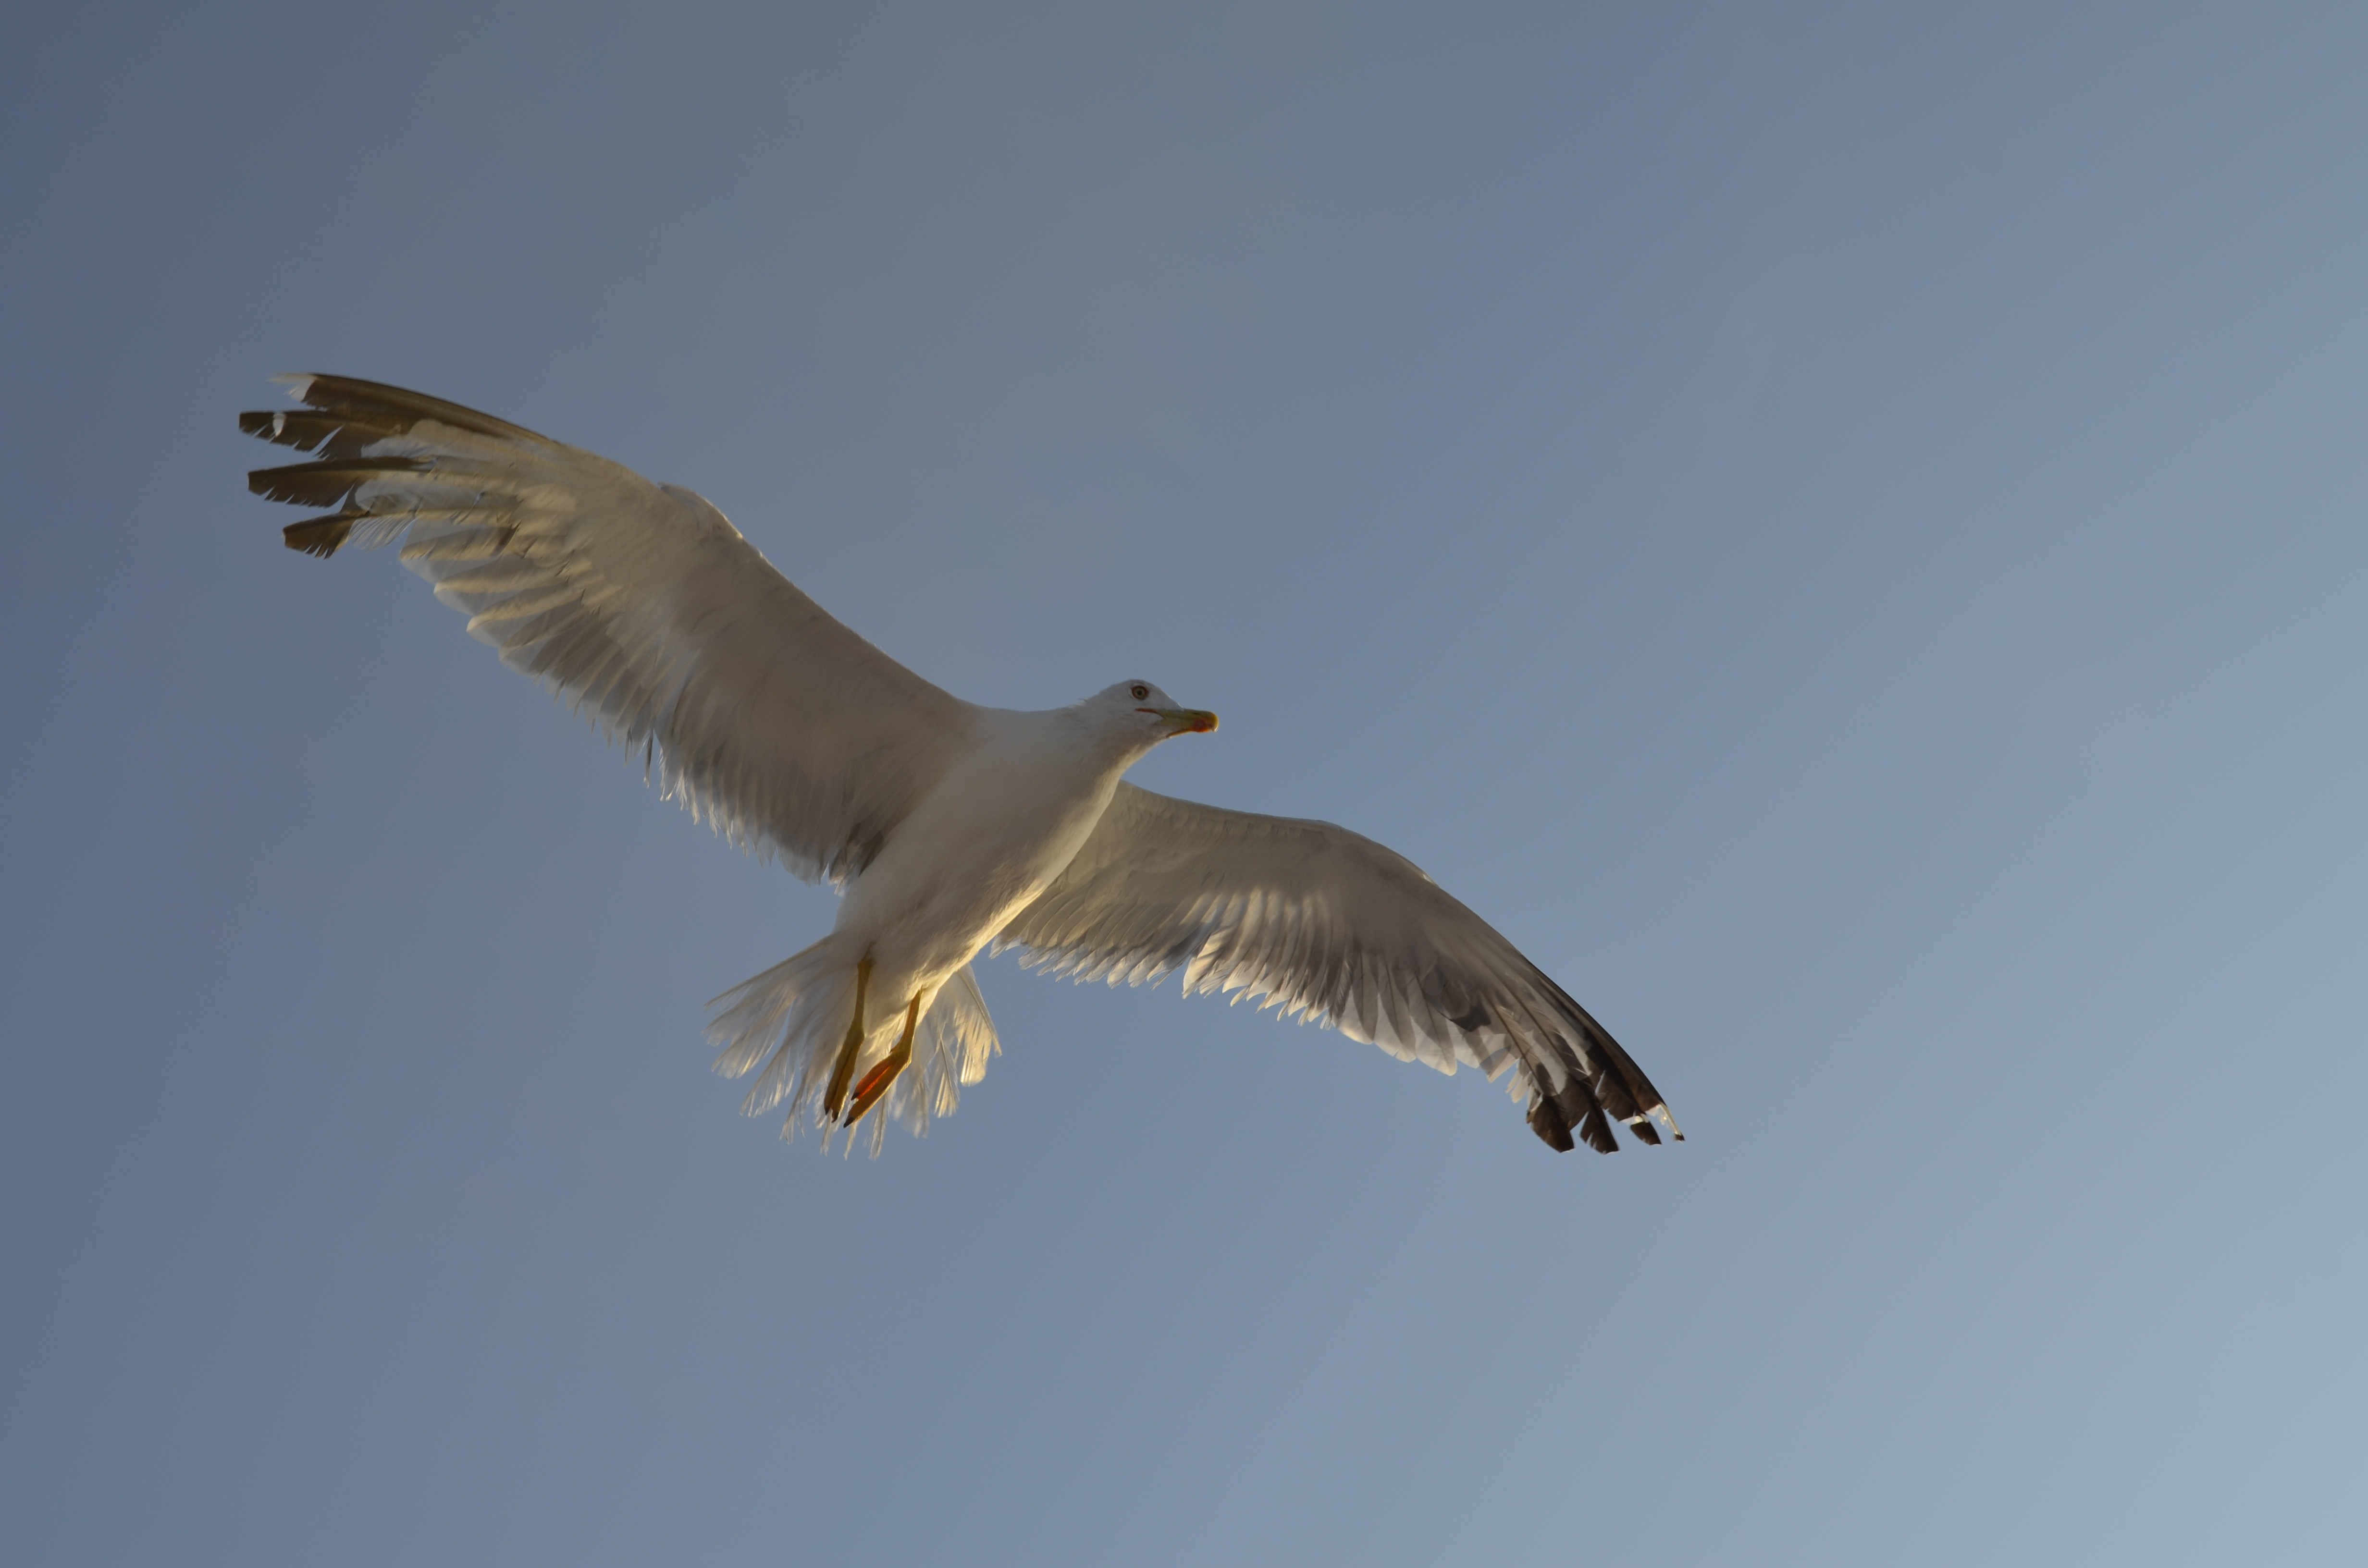 File:Flying seagull with outstretched wings number one.JPG ...